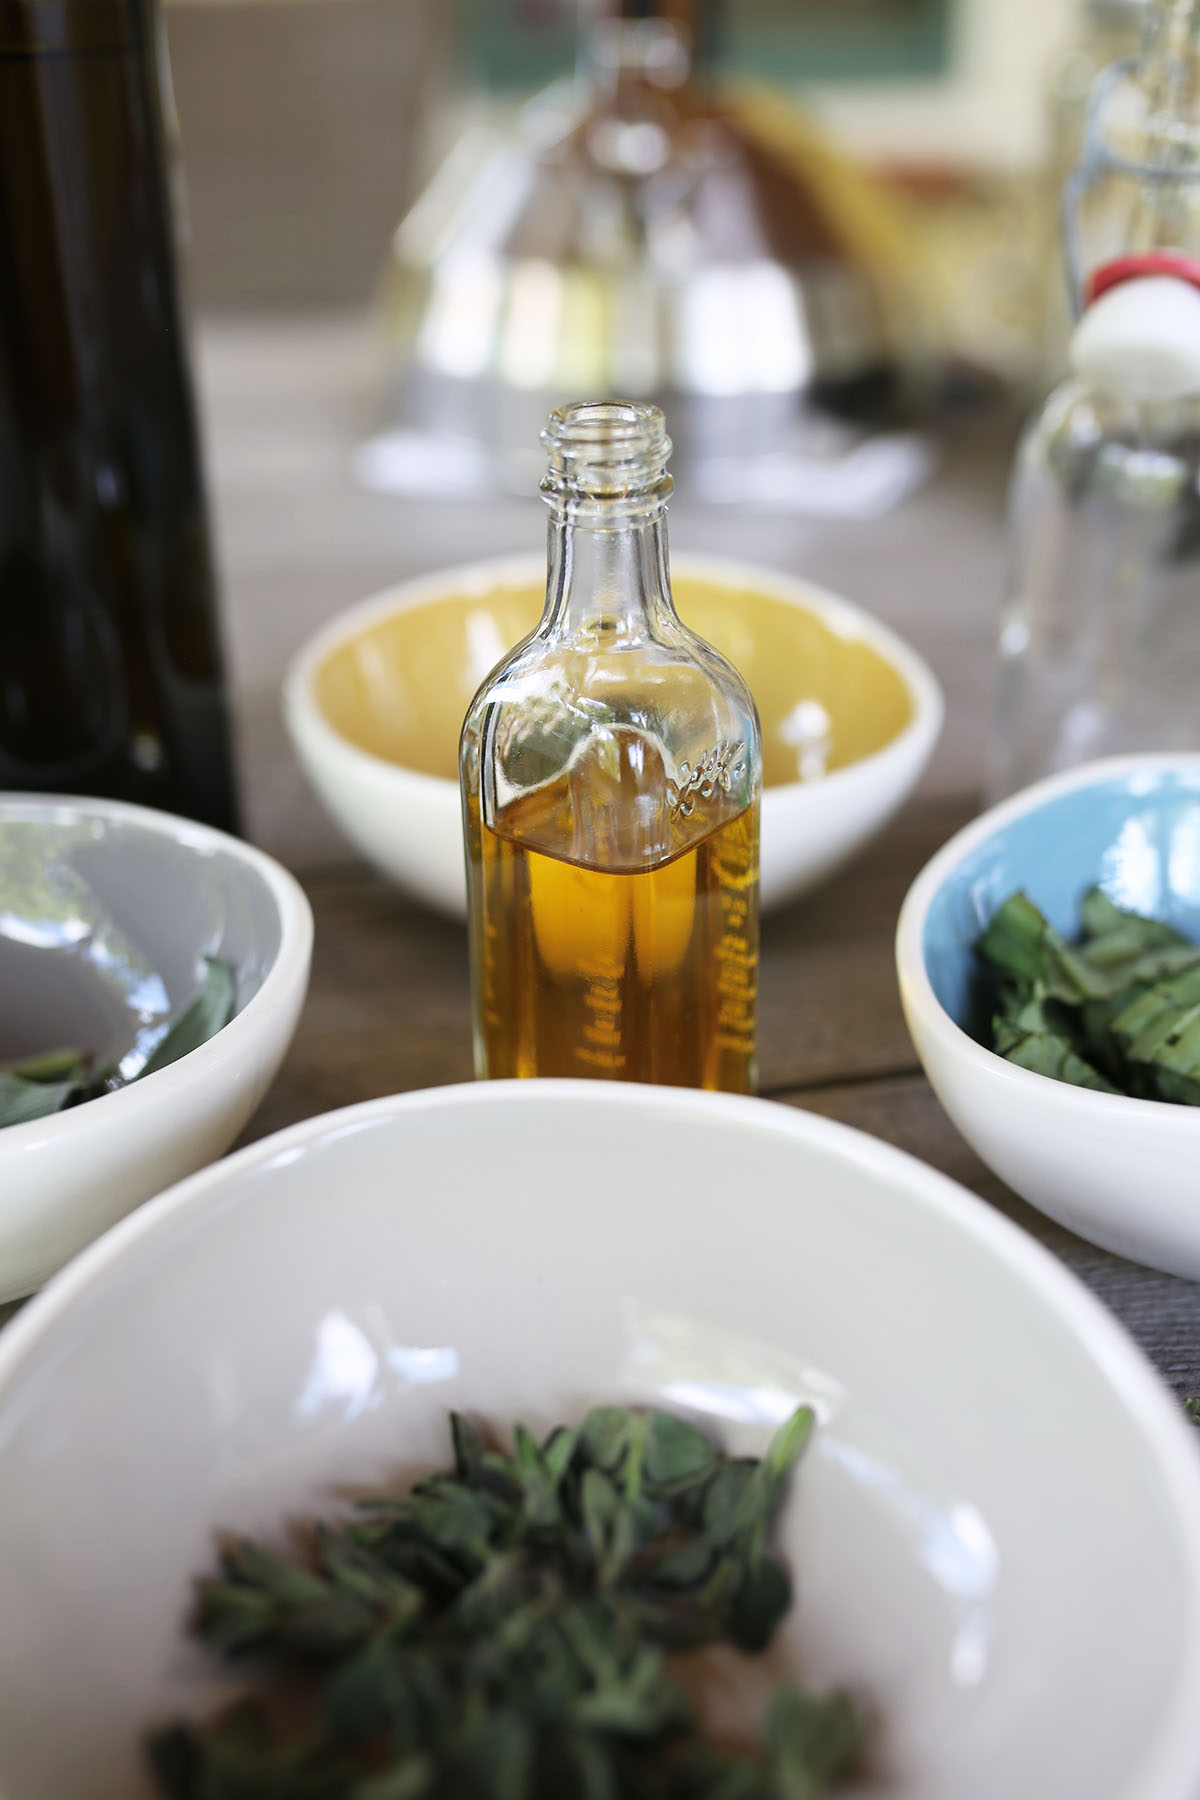 Ayurvedic Uses Of Herbal Oils | Herbal Academy | Do you know the use of herbal oils in Ayurveda is quite extensive? Here's an introduction to more common Ayurvedic uses of herbal oils to get you started!